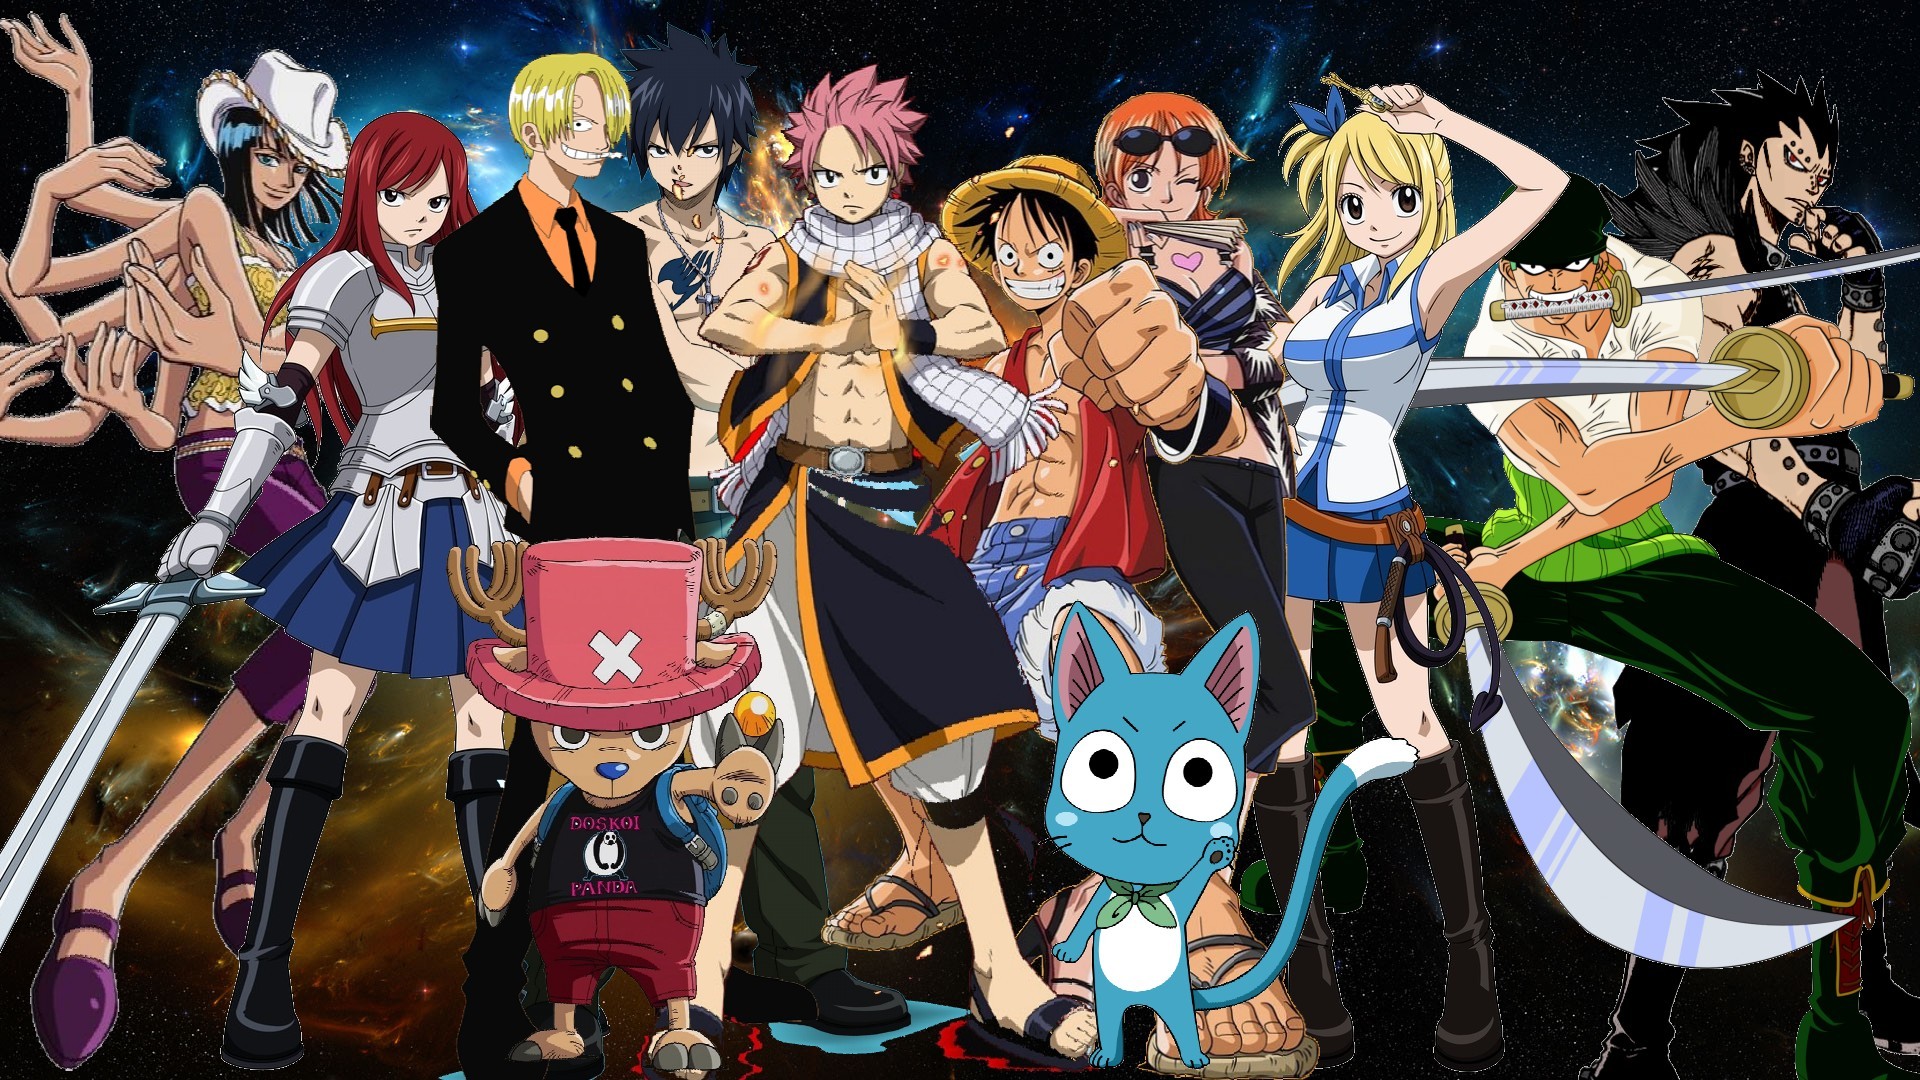 1920x1080 Fairy Tail X One Piece Crossover by Negator7 